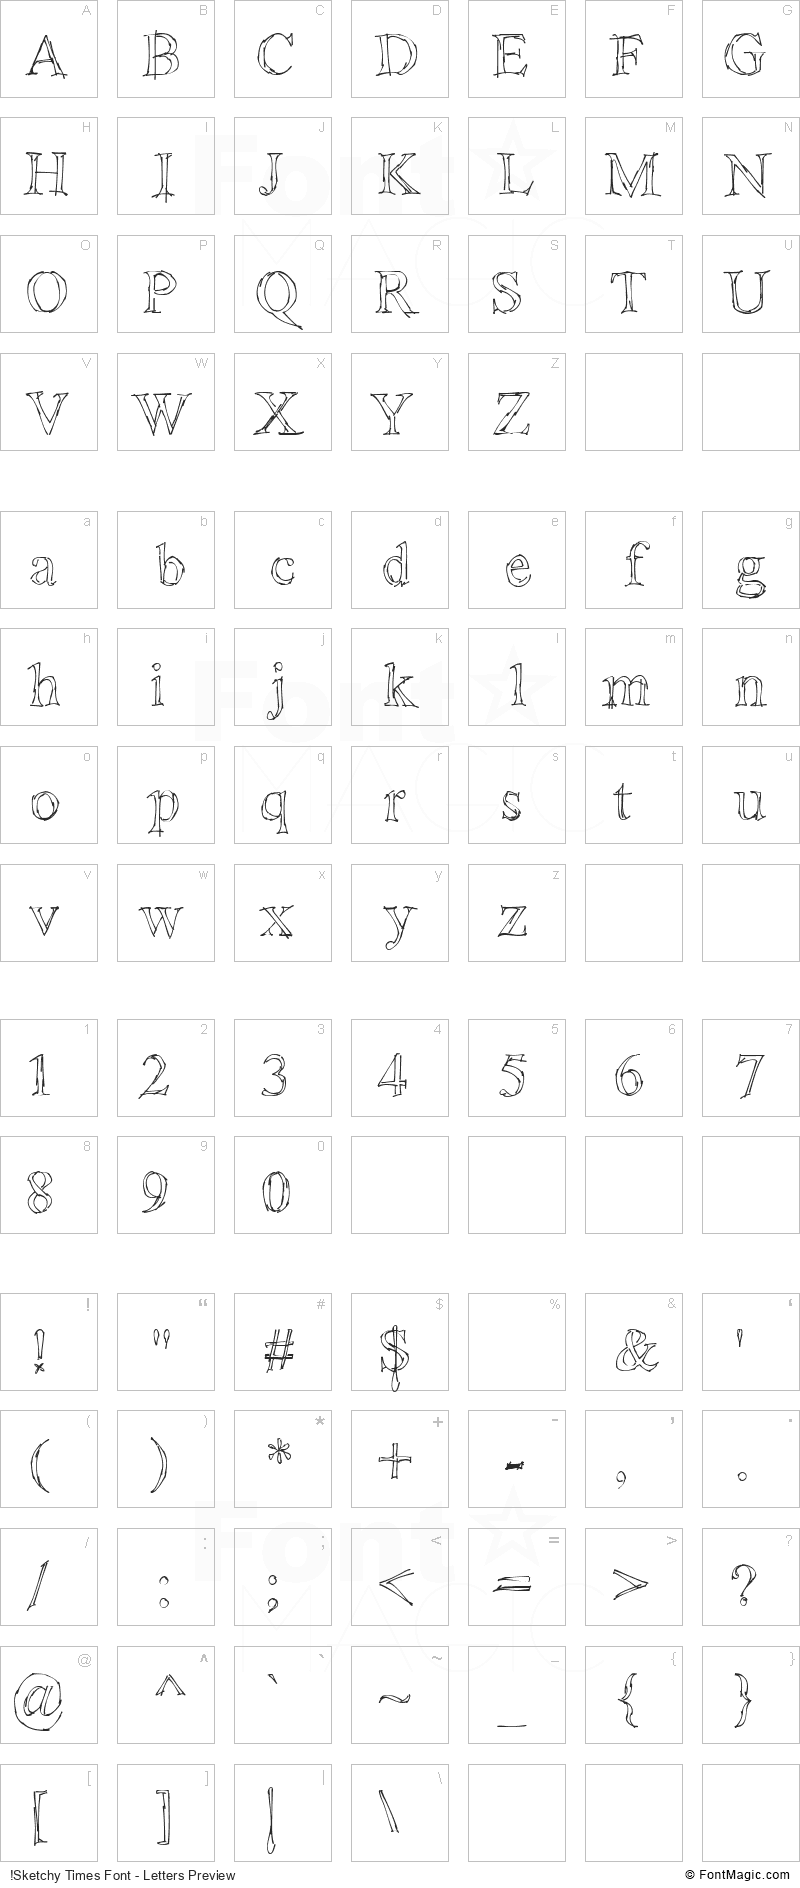 !Sketchy Times Font - All Latters Preview Chart